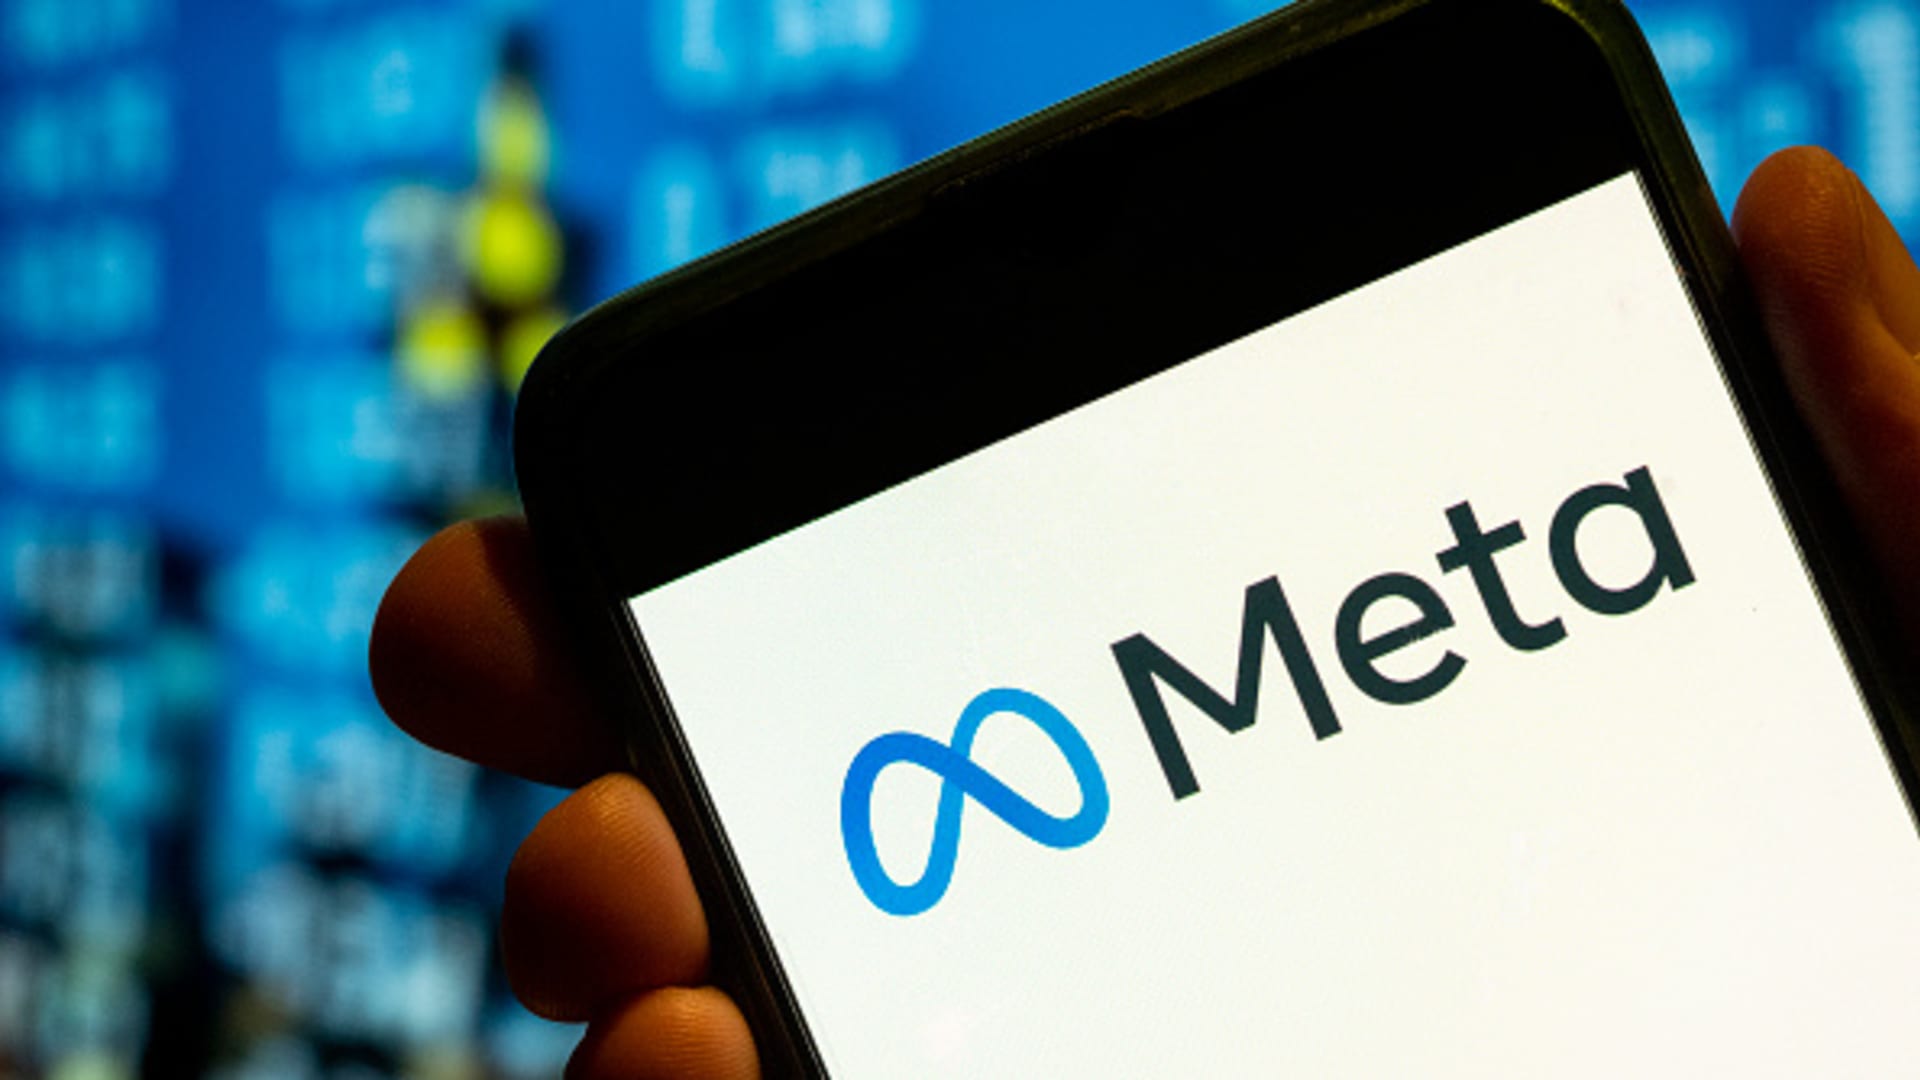 Meta could face $11.8 billion fine as EU charges it with antitrust breach